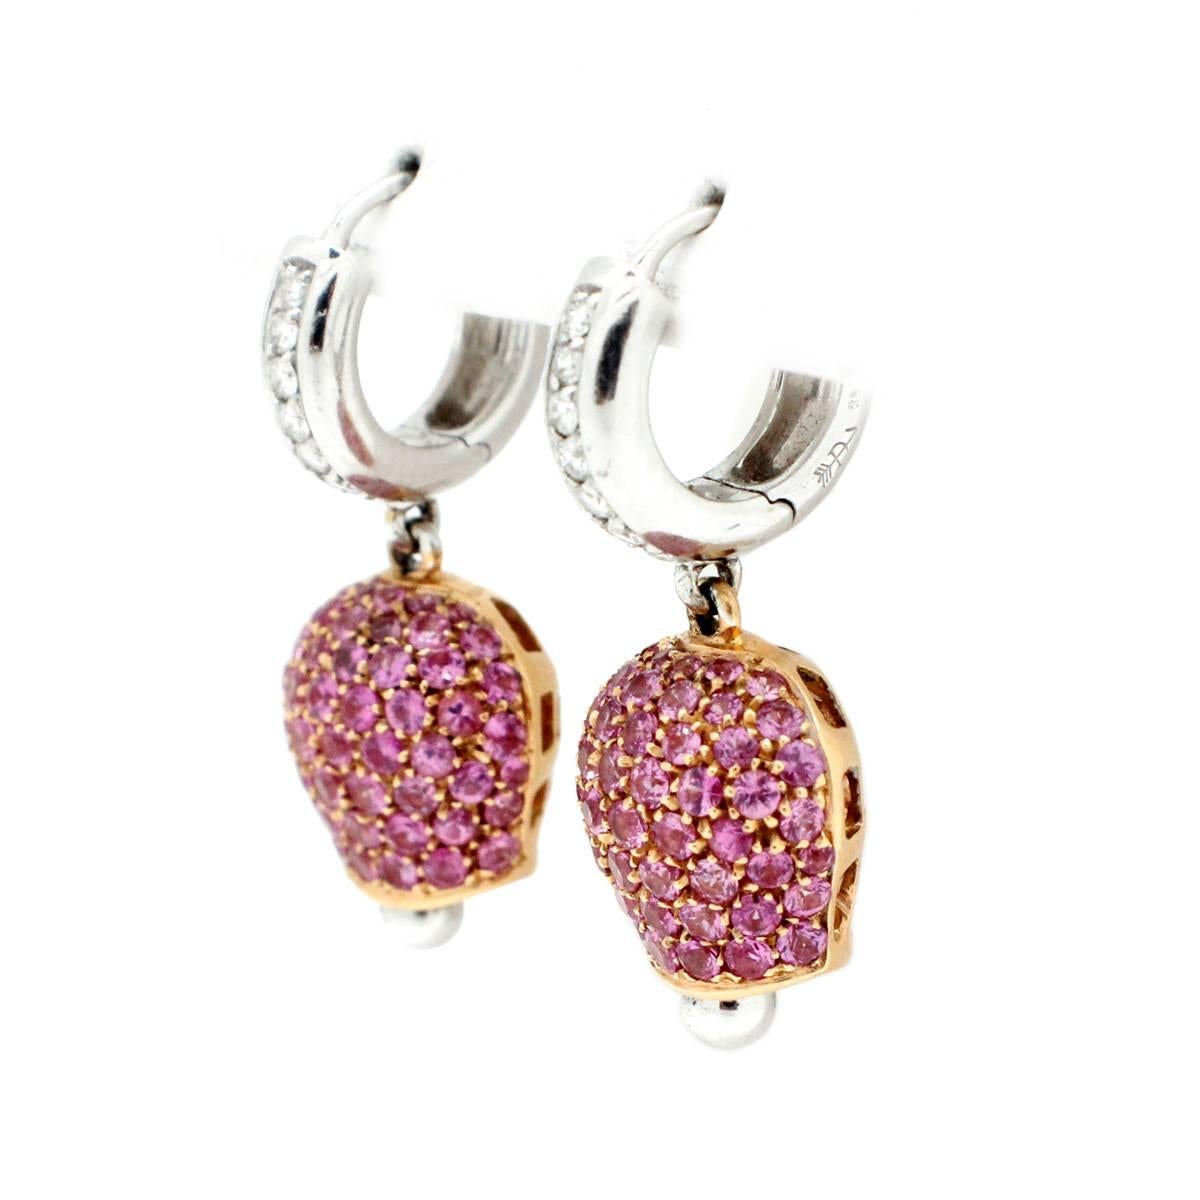 These earrings are made in both 14k white gold and 14k yellow gold. The earrings feature white gold huggies set with round diamonds. The diamonds have a total weight of 0.28 carat. Then there are yellow gold dangling attachments that are set with